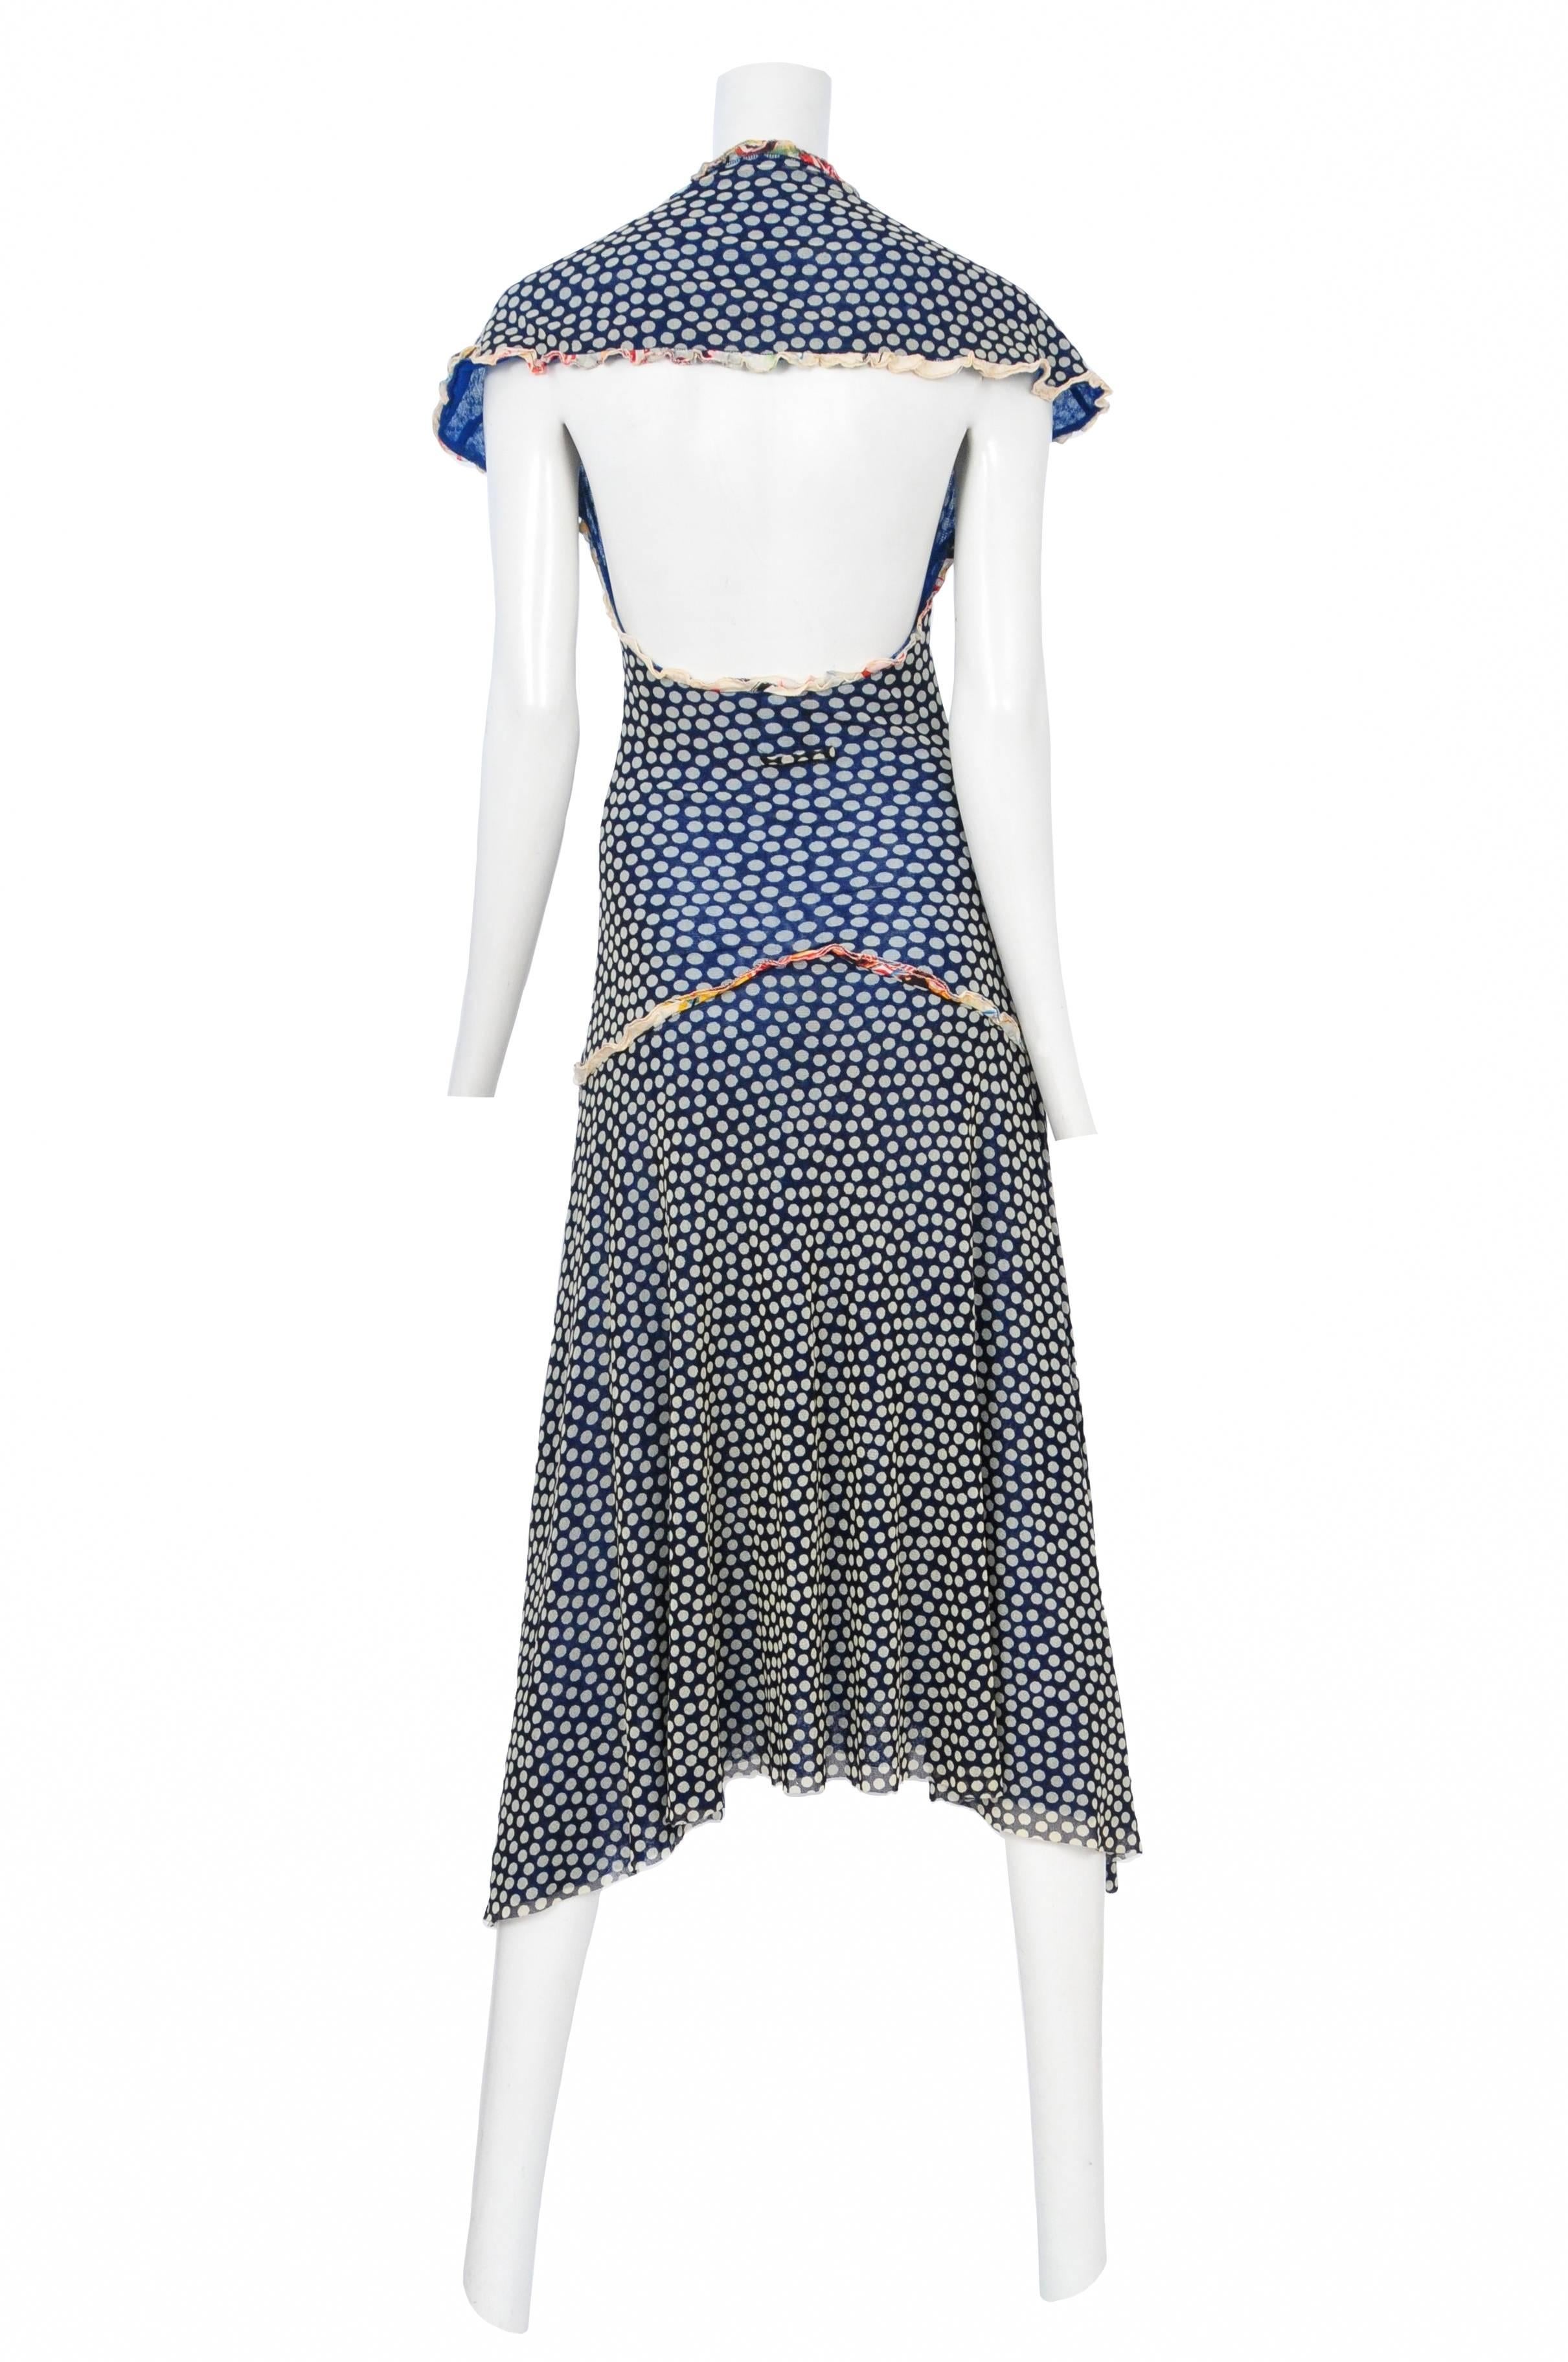 Vintage Jean Paul Gaultier v-neck blue dot pattern mesh dress featuring cap sleeves, a built in drop waist, an uneven hem line and an open back with a built in capelet at the back shoulders.